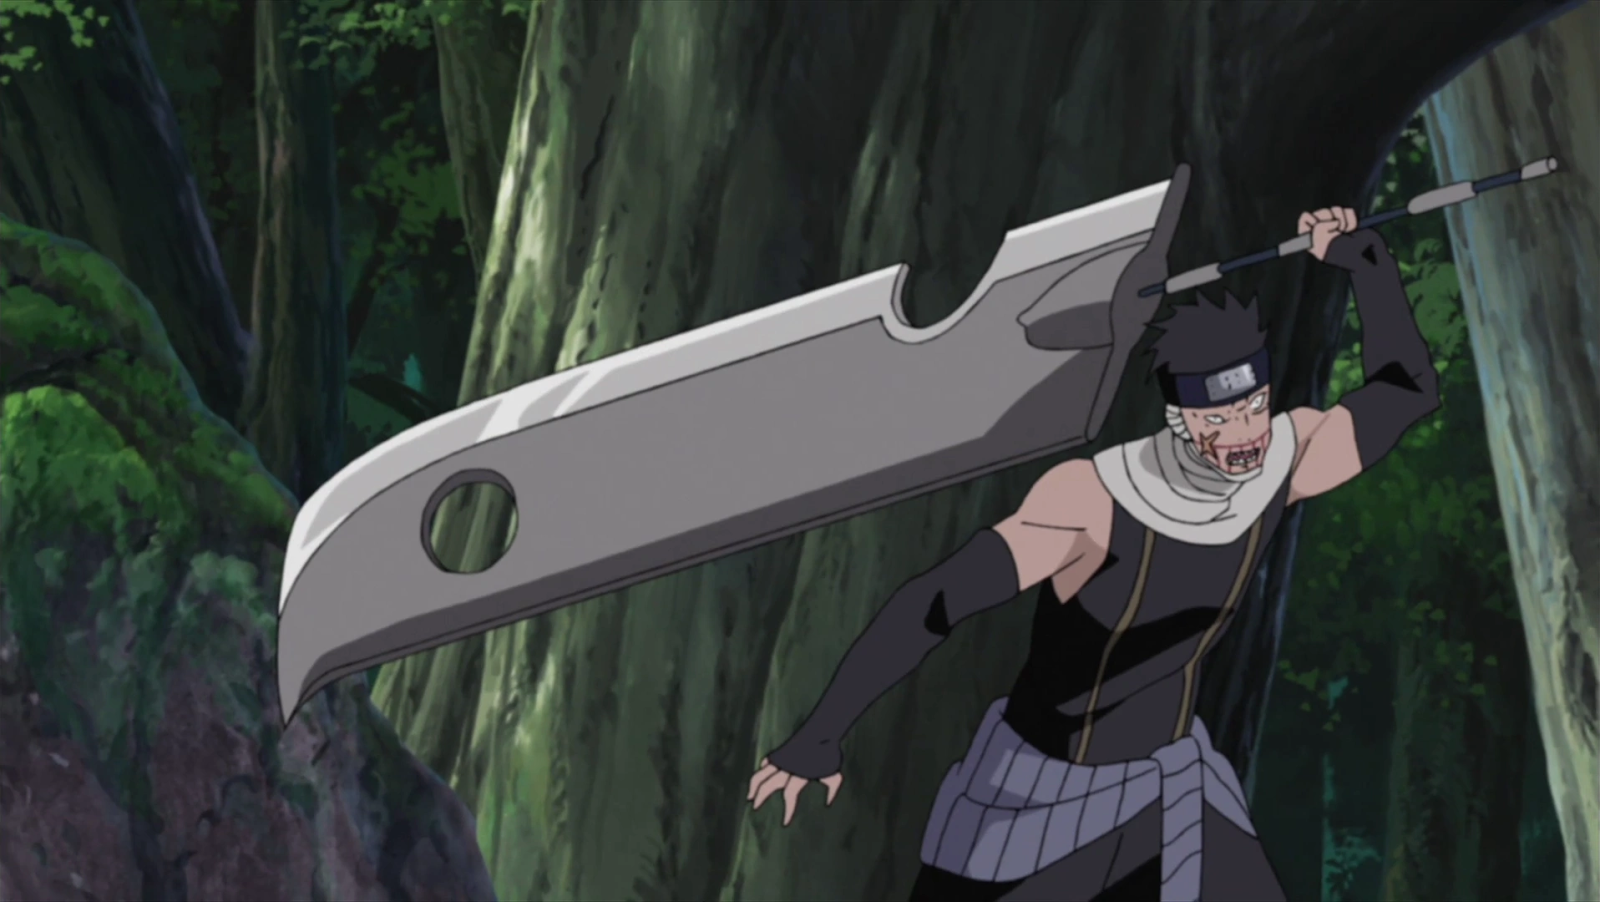 The Executioner's Blade is one of the most iconic weapons from Naruto. 